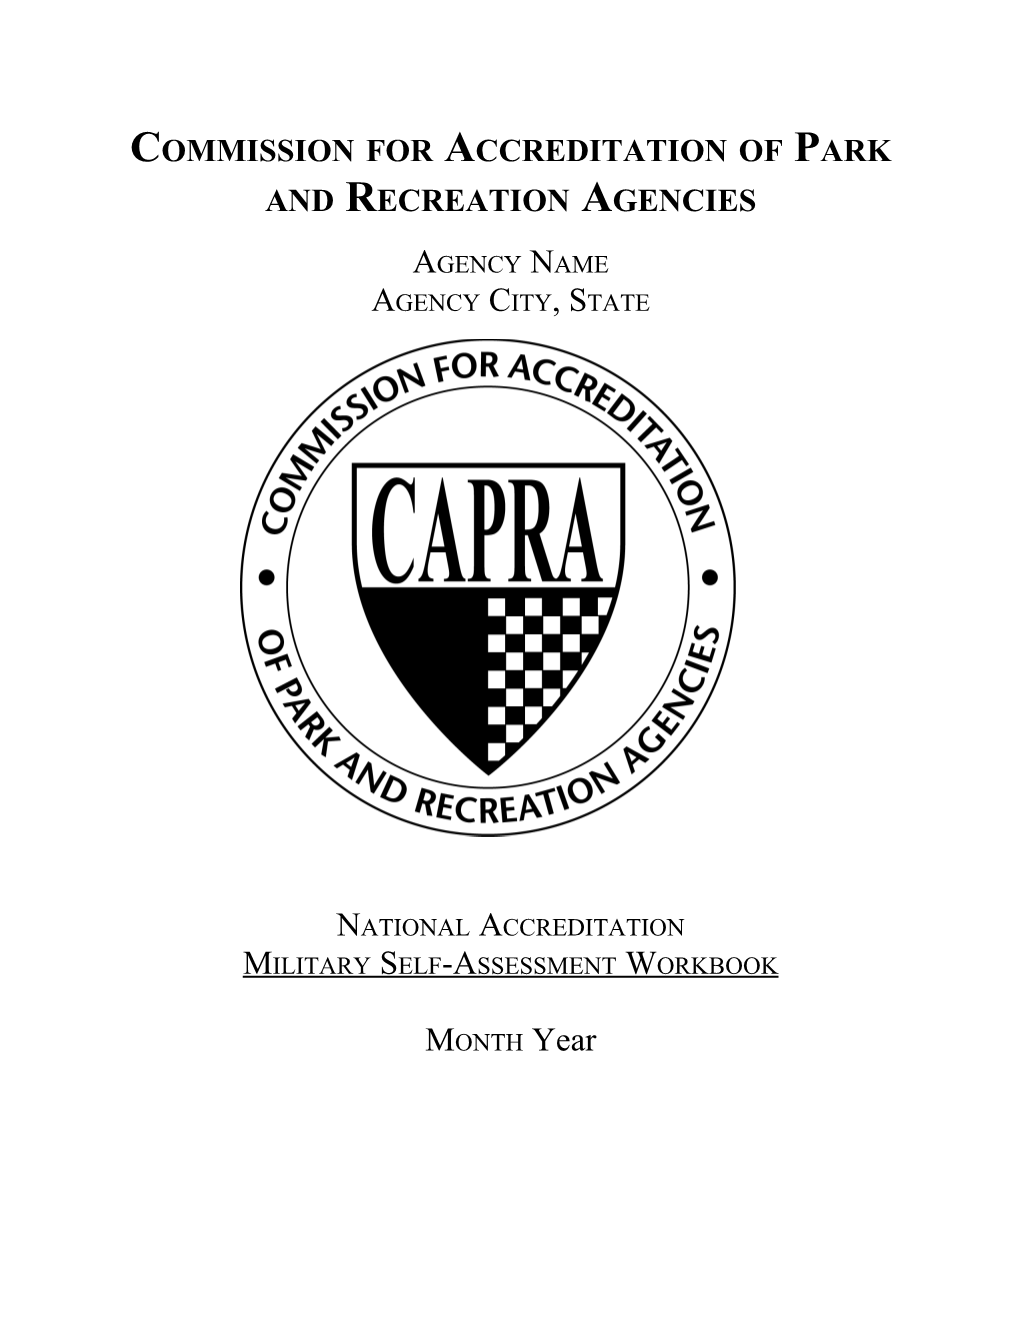 Commission for Accreditation of Park and Recreation Agencies